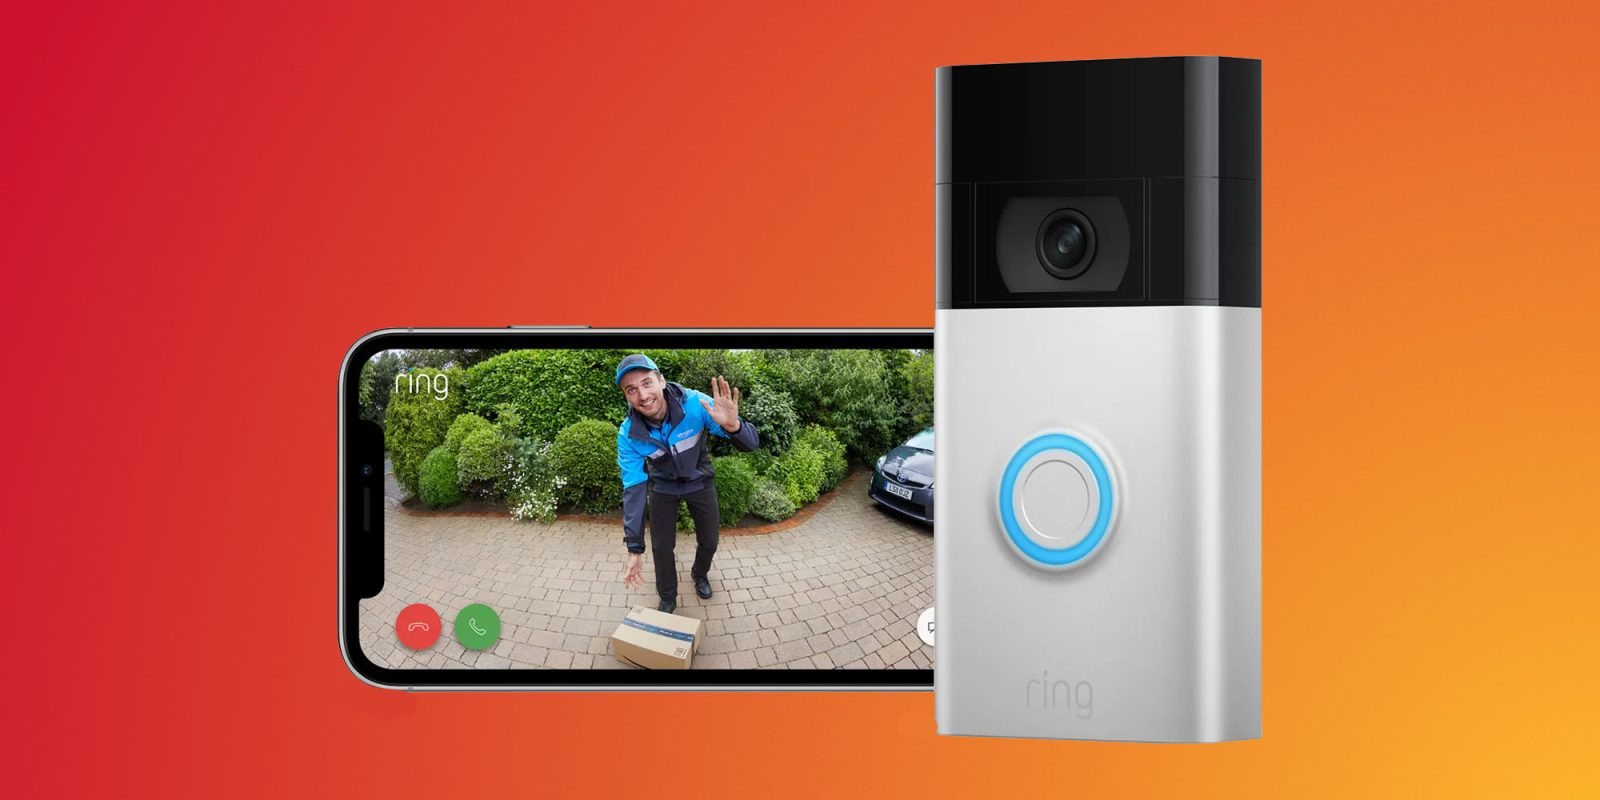 Ring doorbell subscription cost | Photo shows doorbell and iPhone app